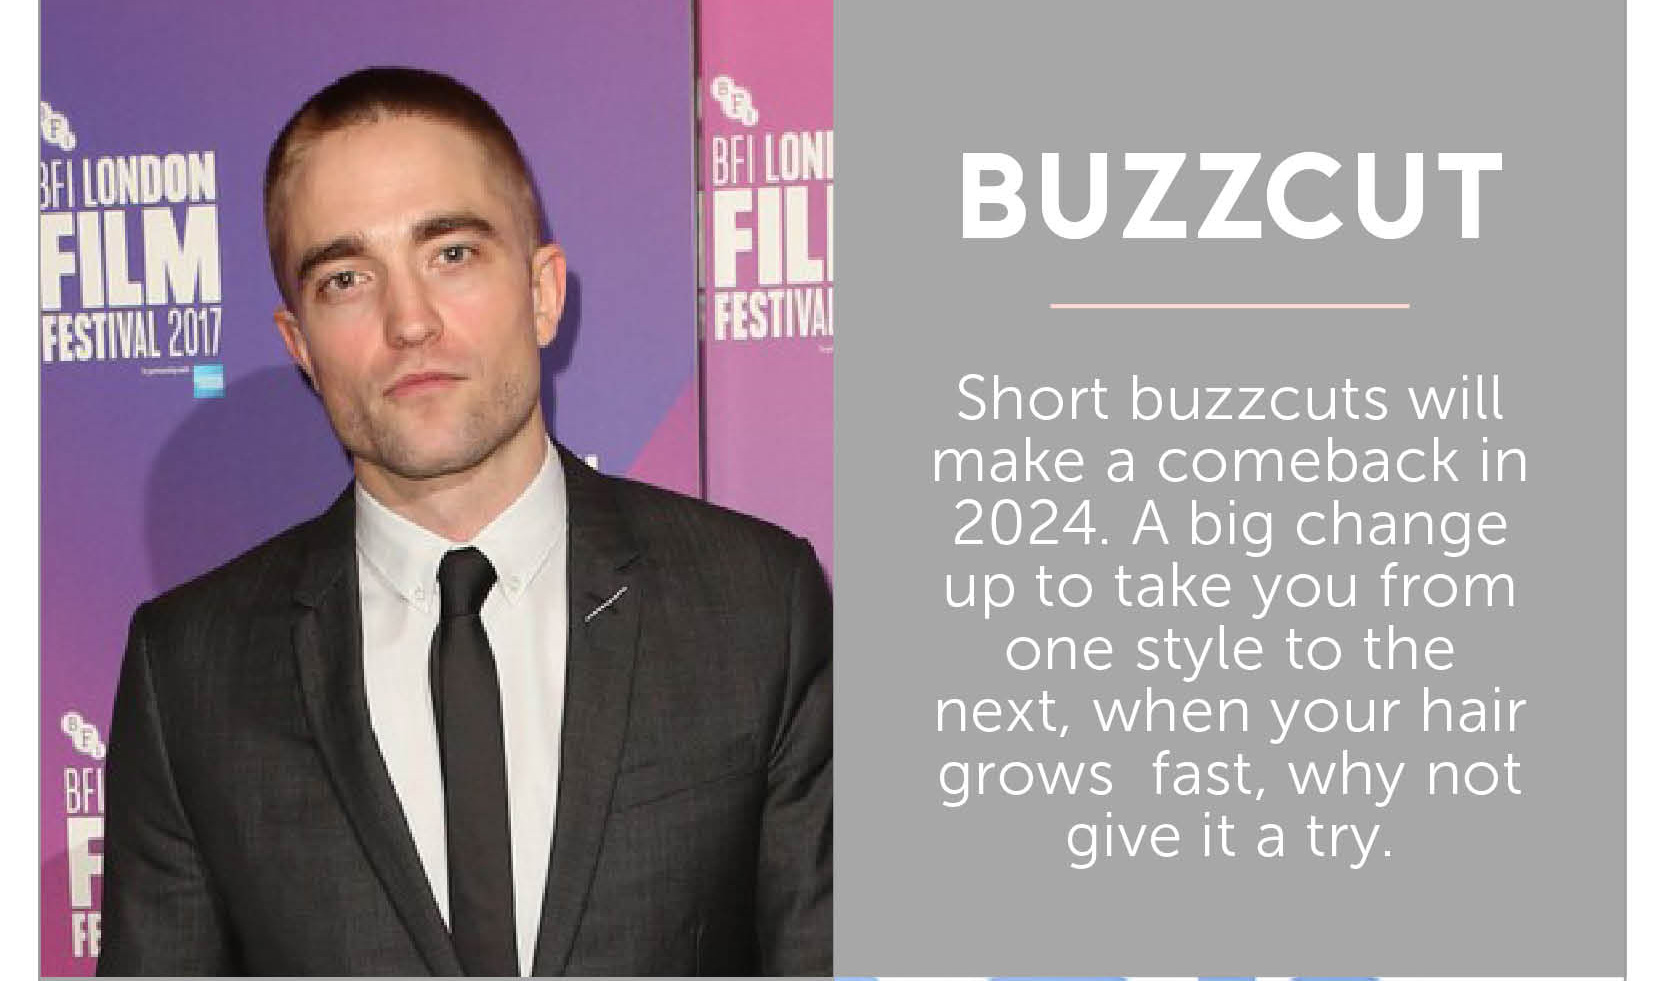 Buzzcut- Short buzzcuts will make a comeback in 2024. A big change up to take you from one style to the next, when your hair grows  fast, why not give it a try.